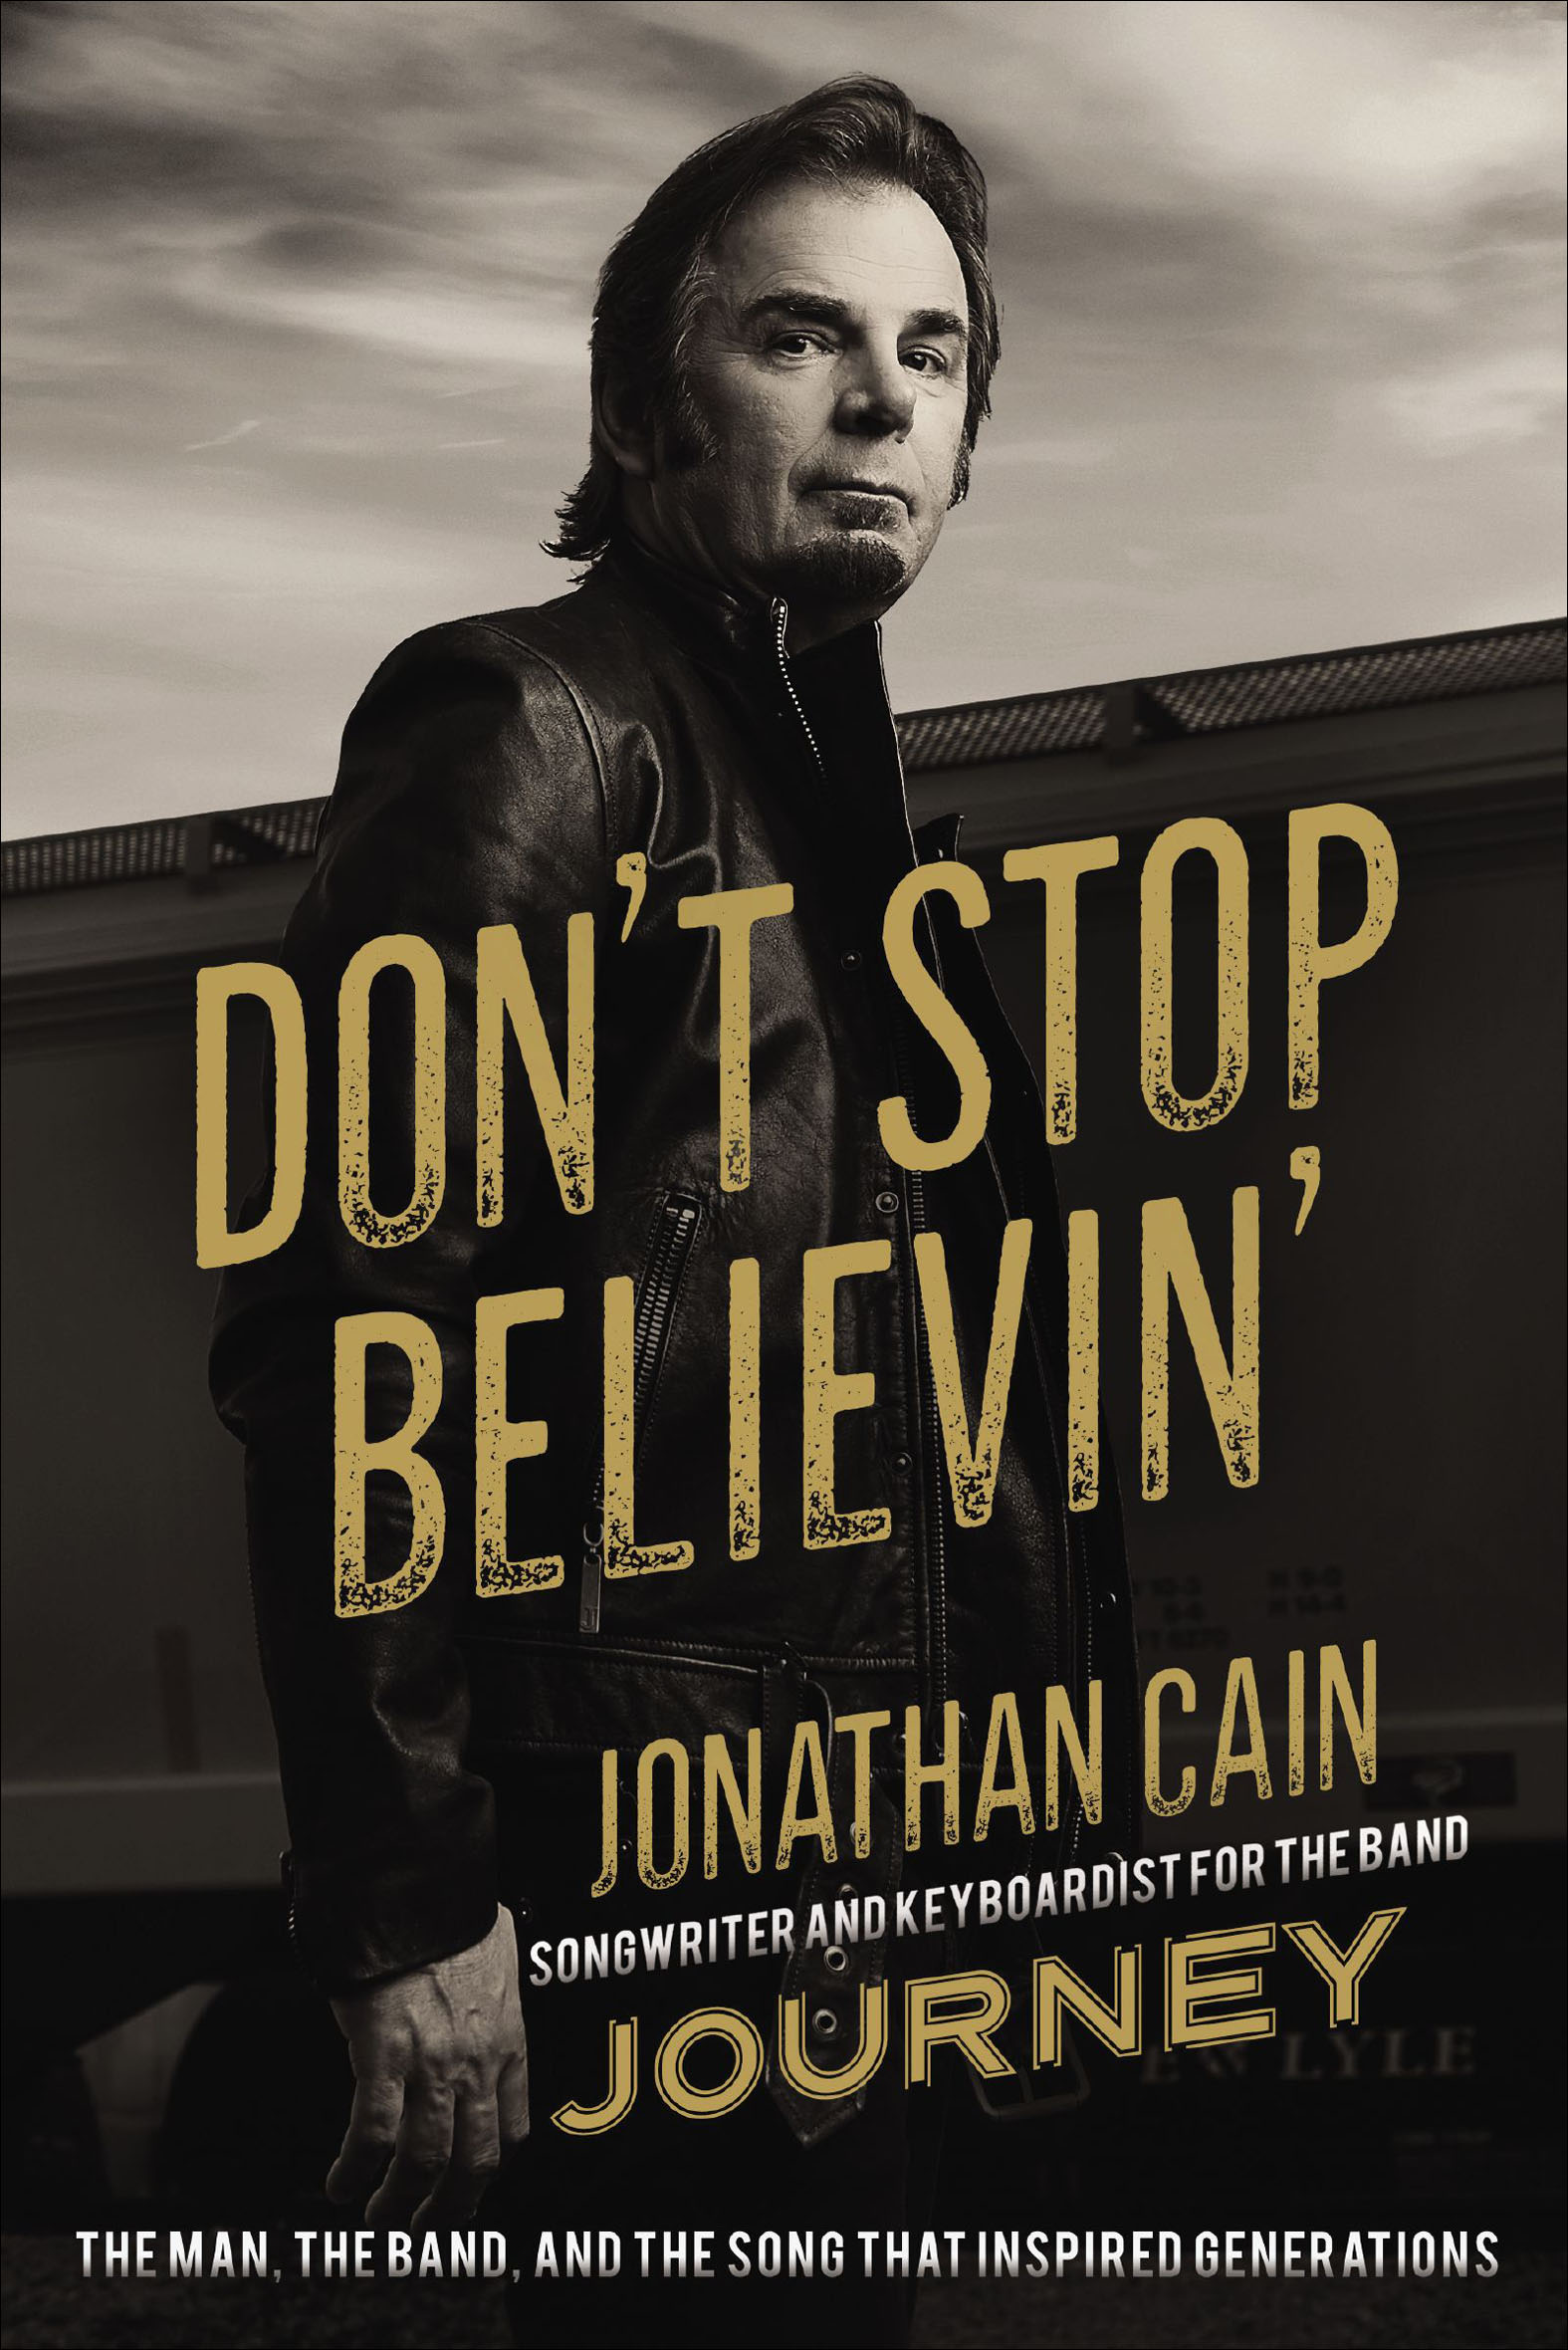 Don't stop believin' the man, the band, and the song that inspired generations cover image